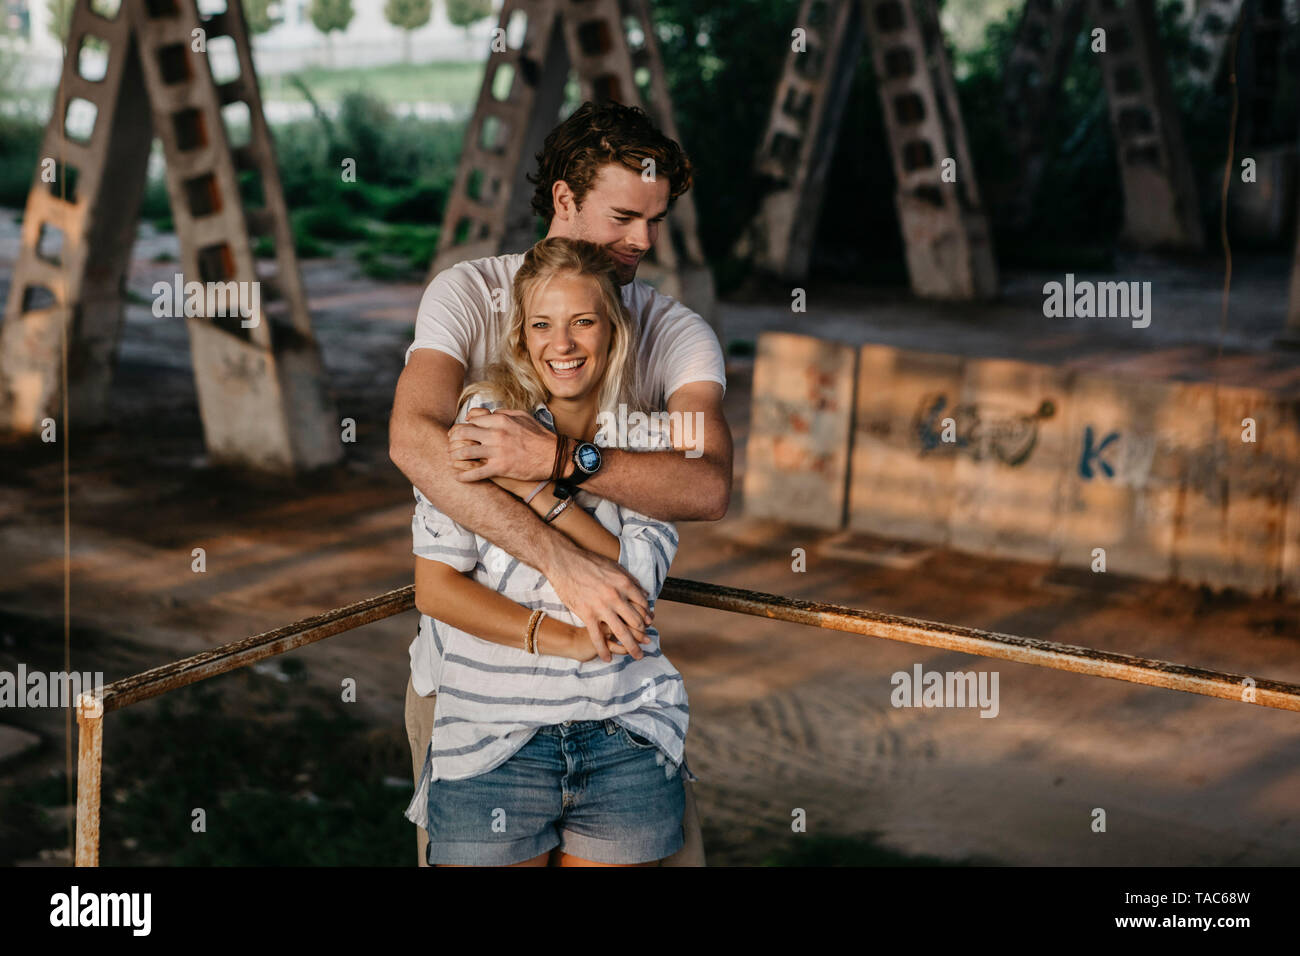 Portrait of happy young couple in an old train station Stock Photo